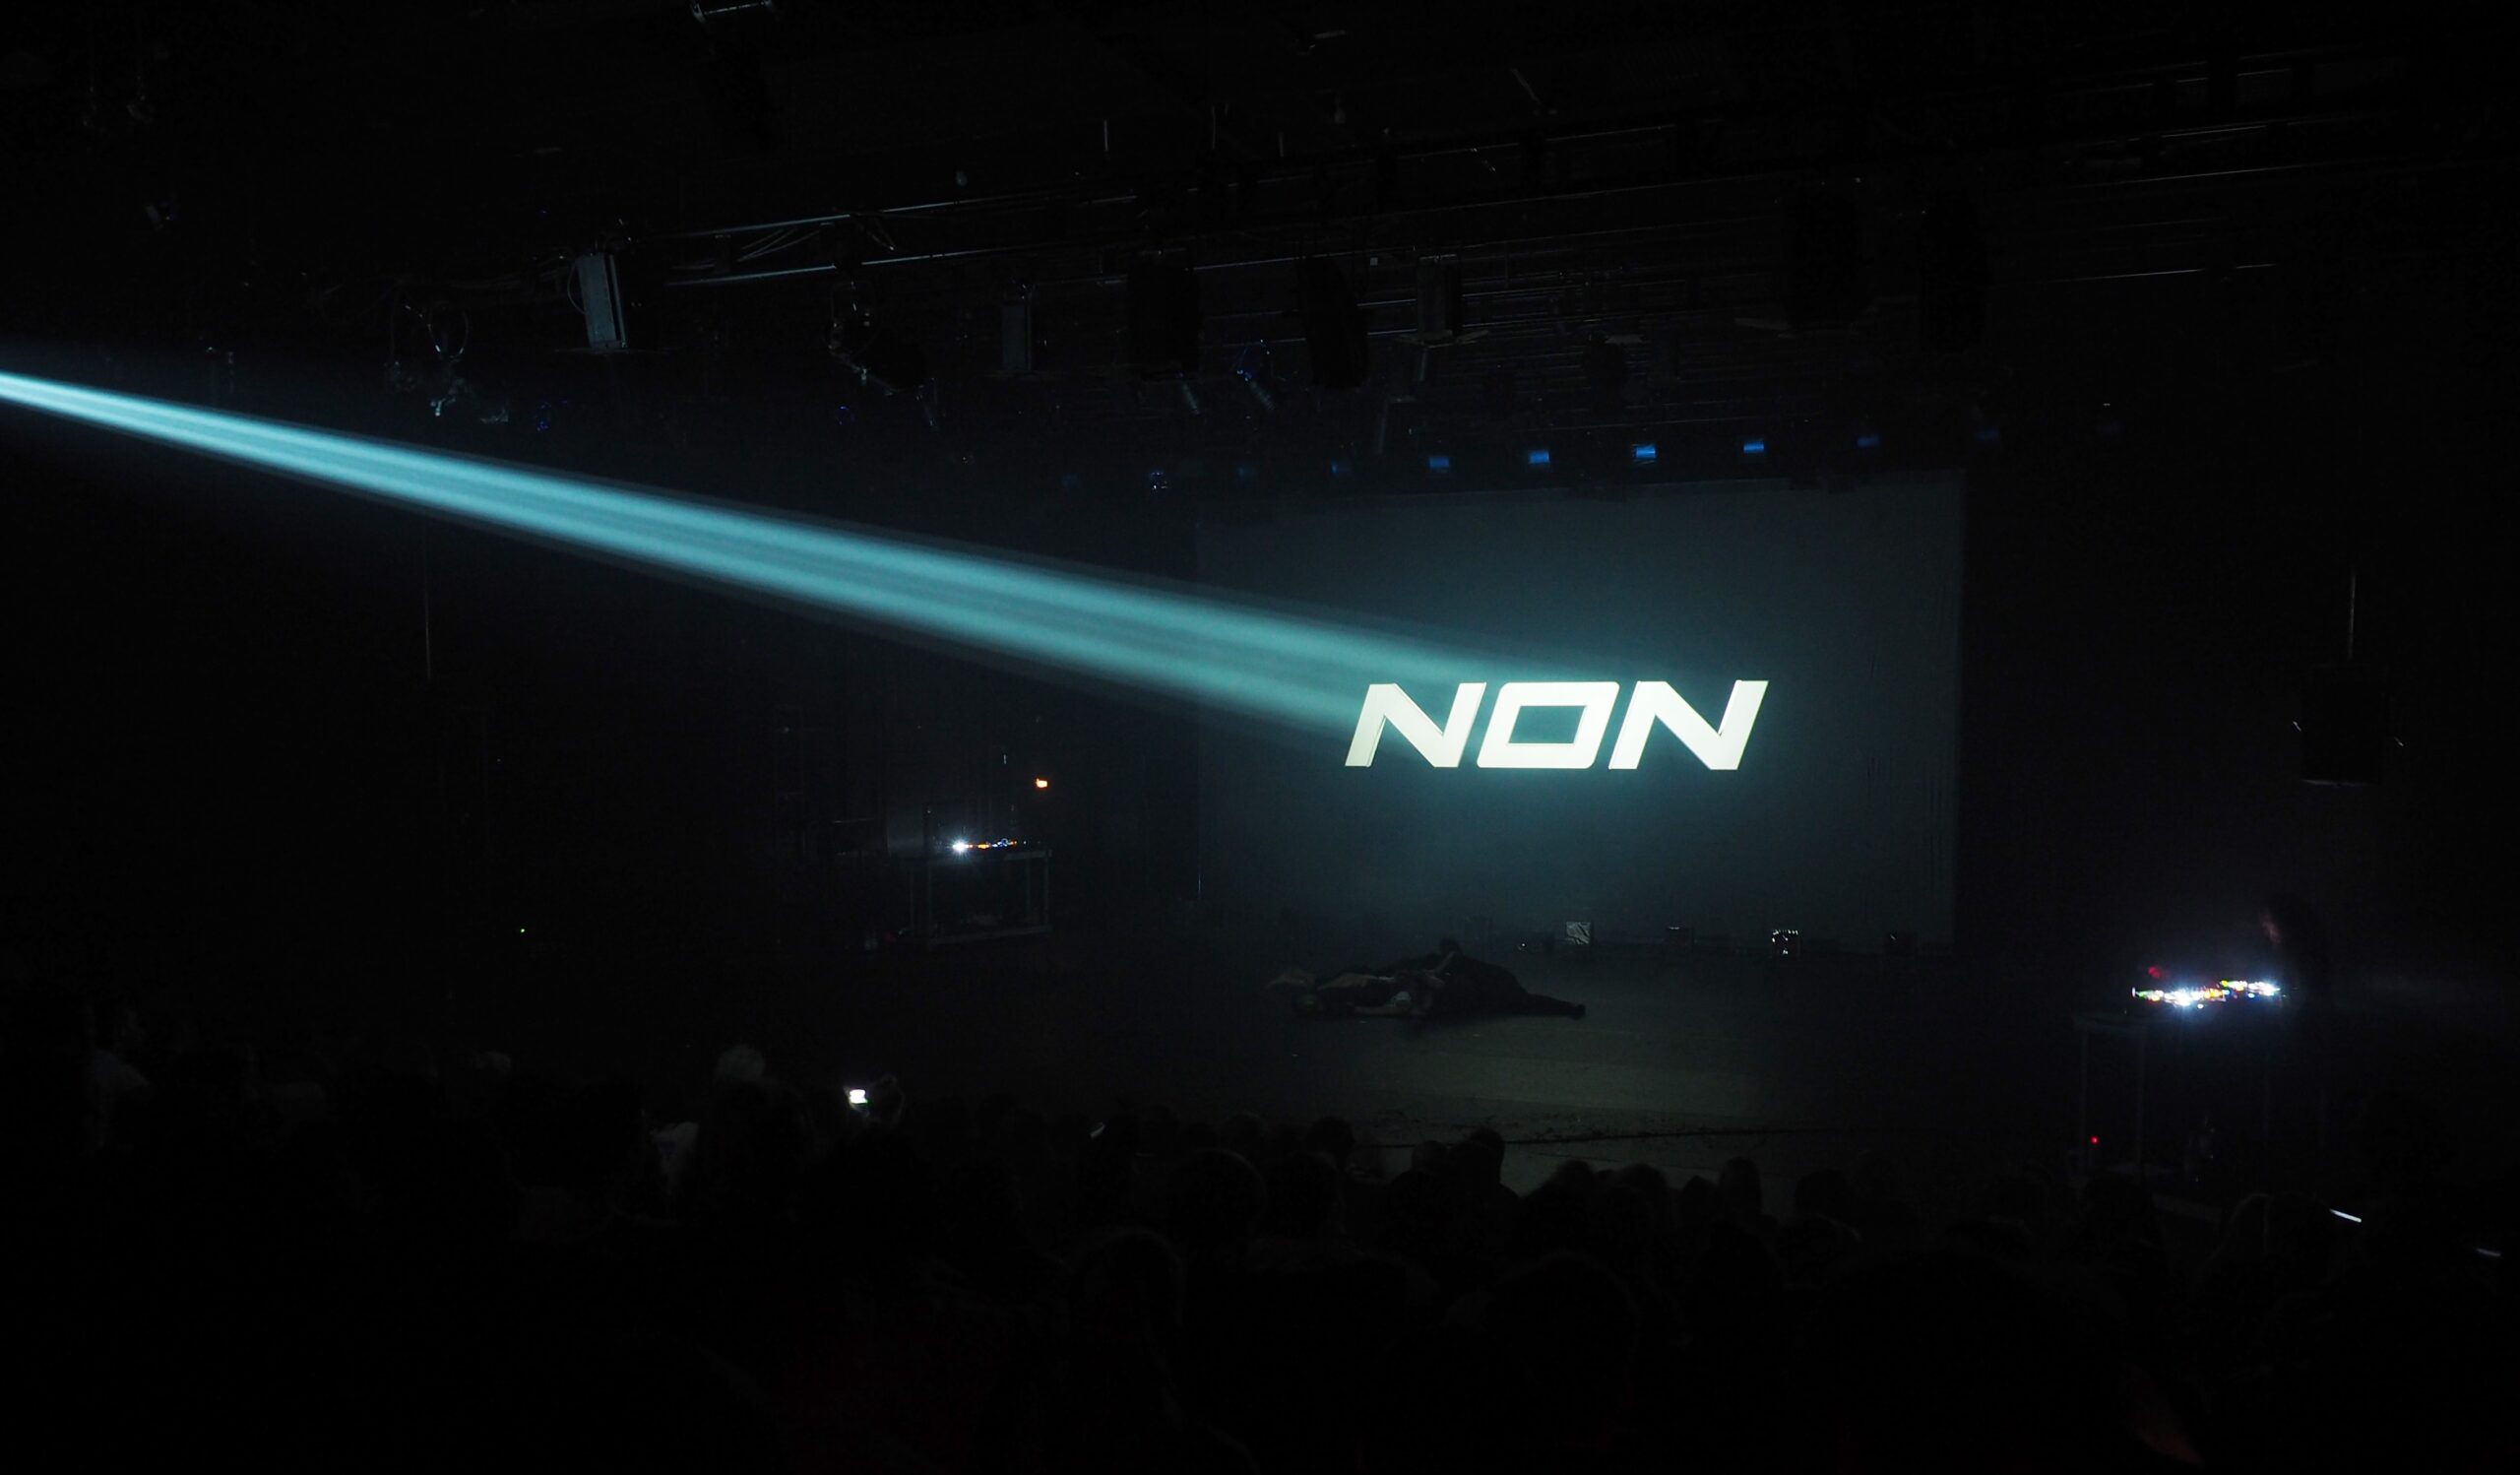 NON at CTM, Berlin, 2017. Photo by Udo Siegfriedt 